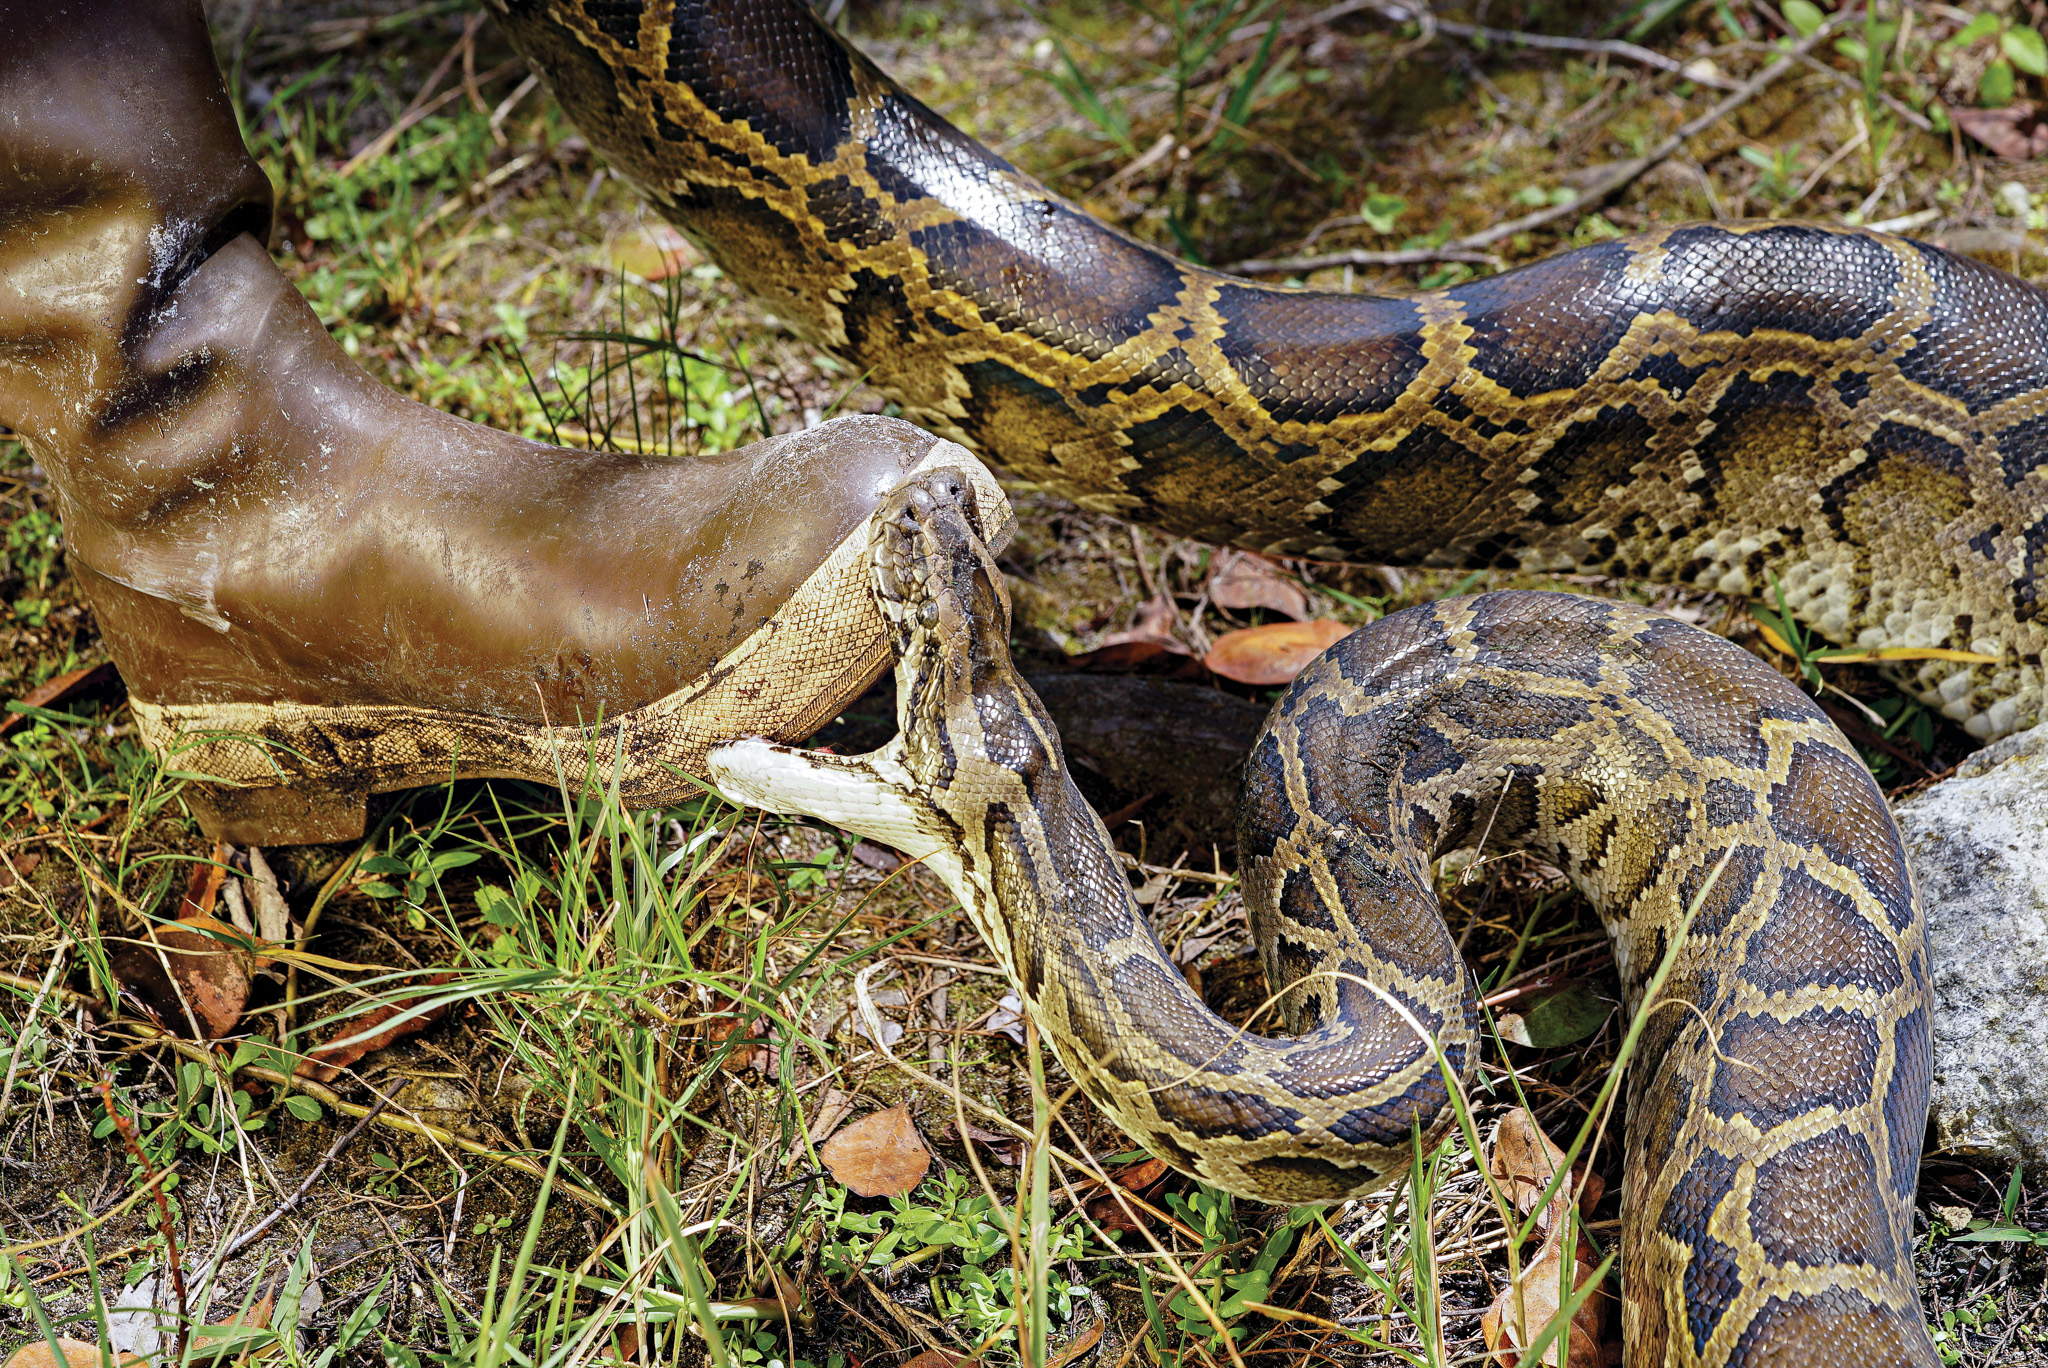 A small python in Florida bites a boot.